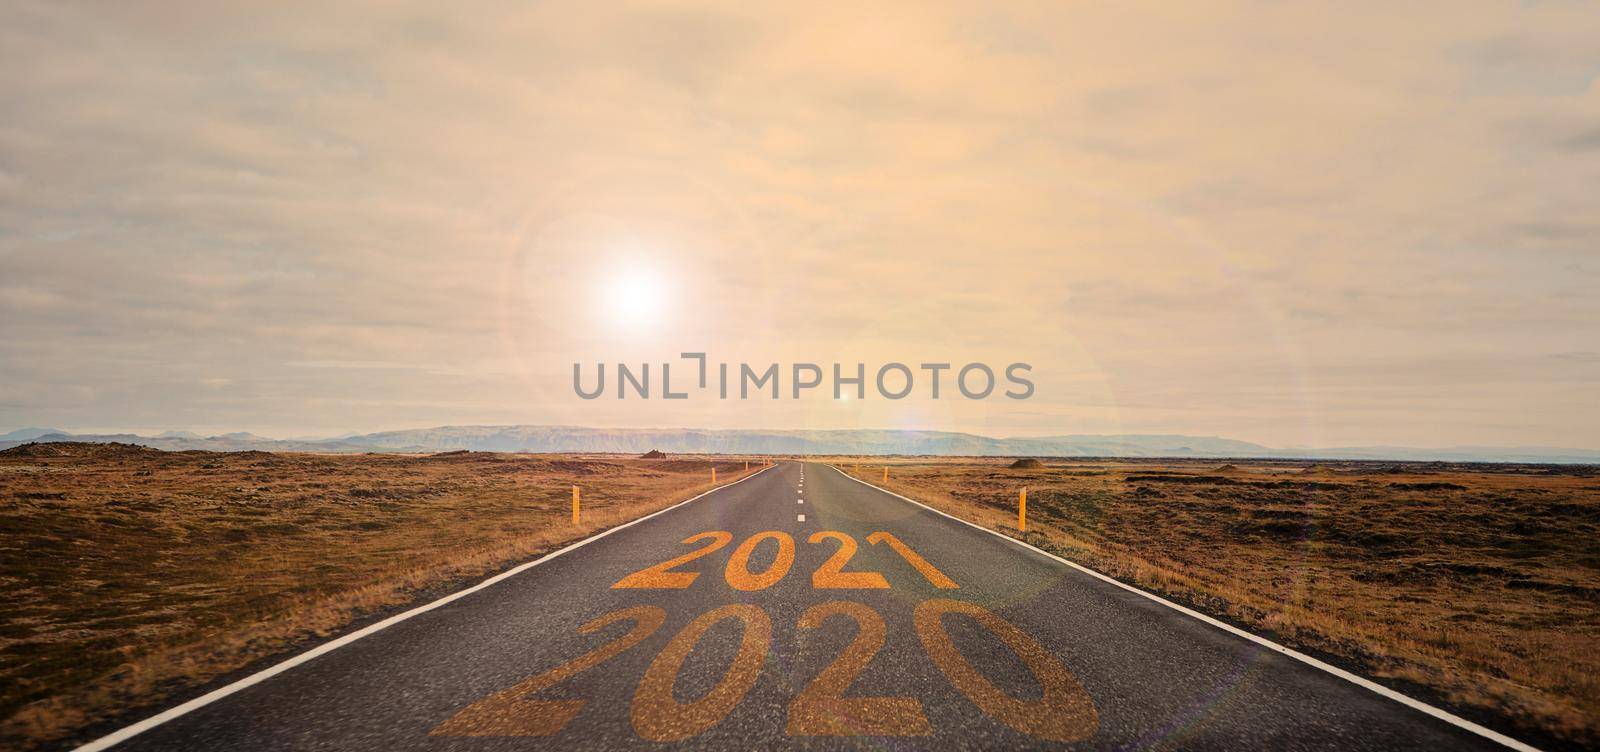 The word 2021 written on highway road in the middle of empty asphalt road by driver-s